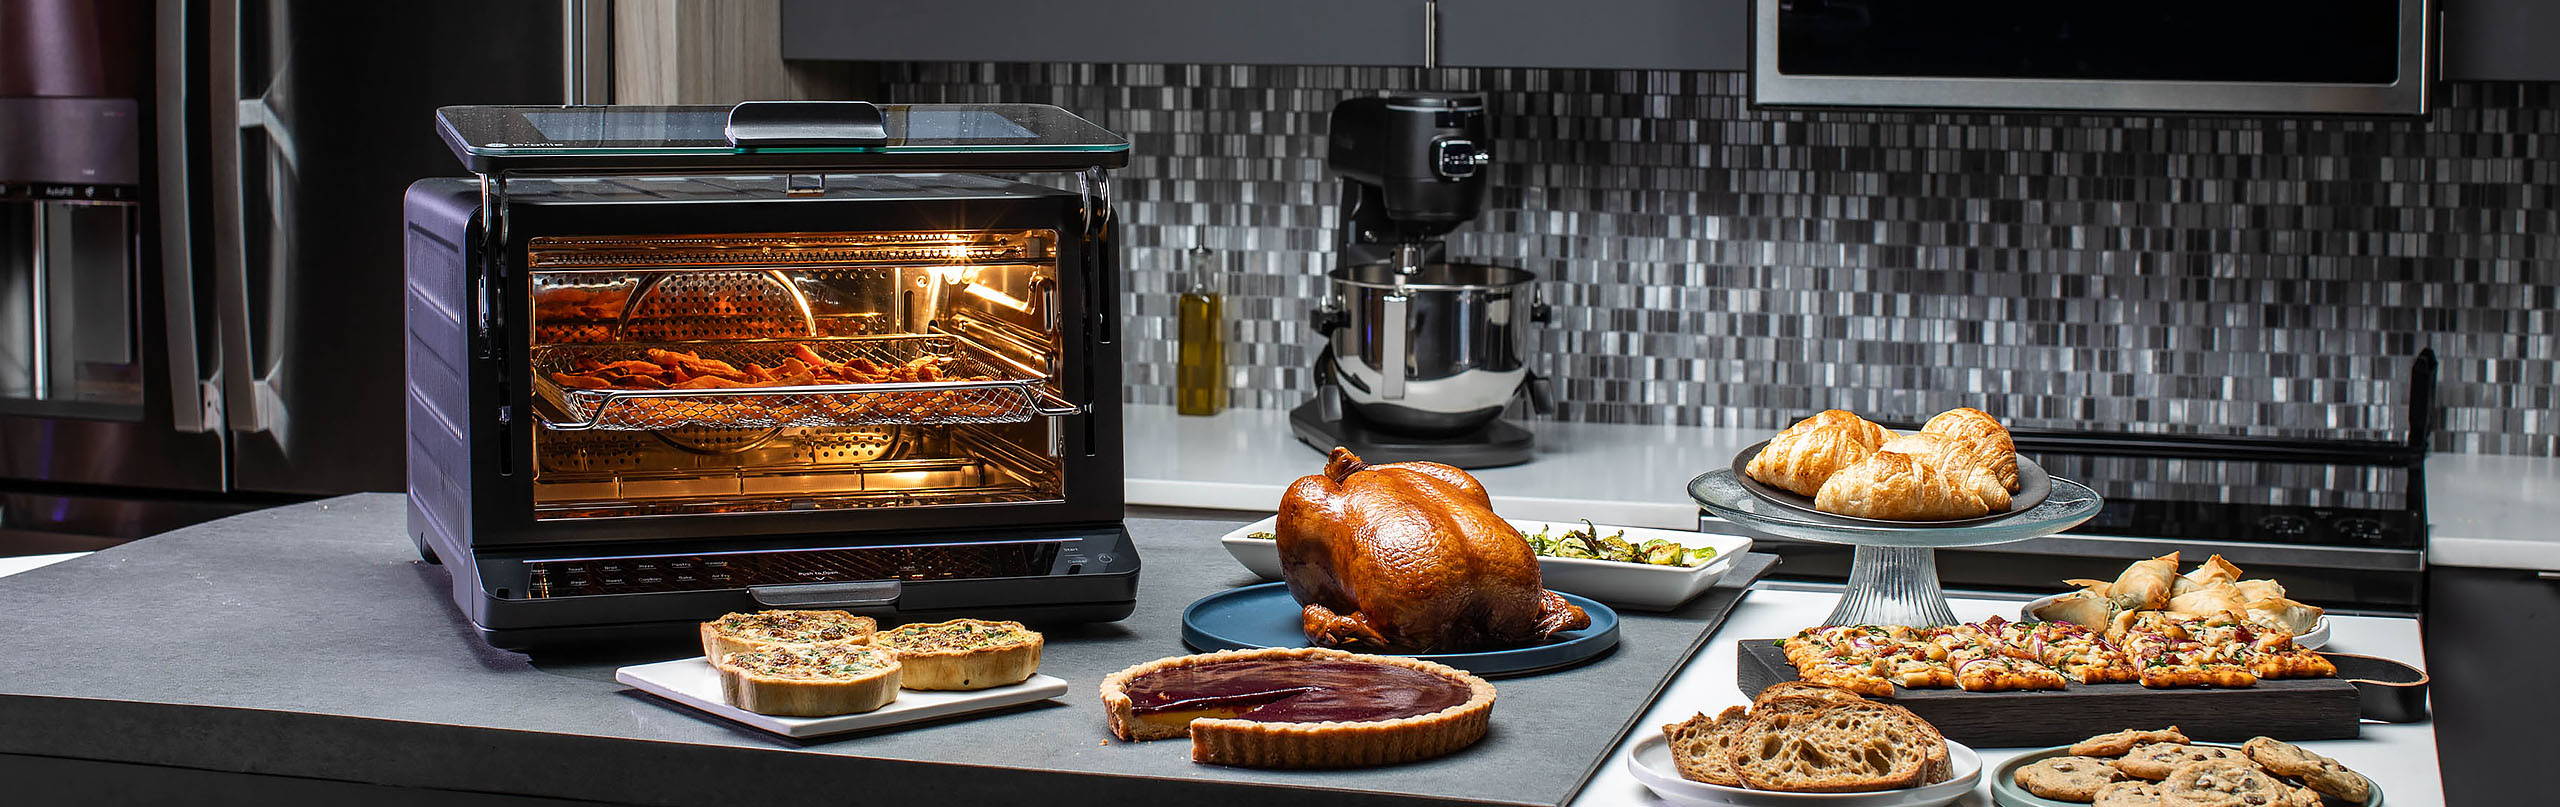 GE Profile Smart Oven on counter with several delicious foods surrounding it